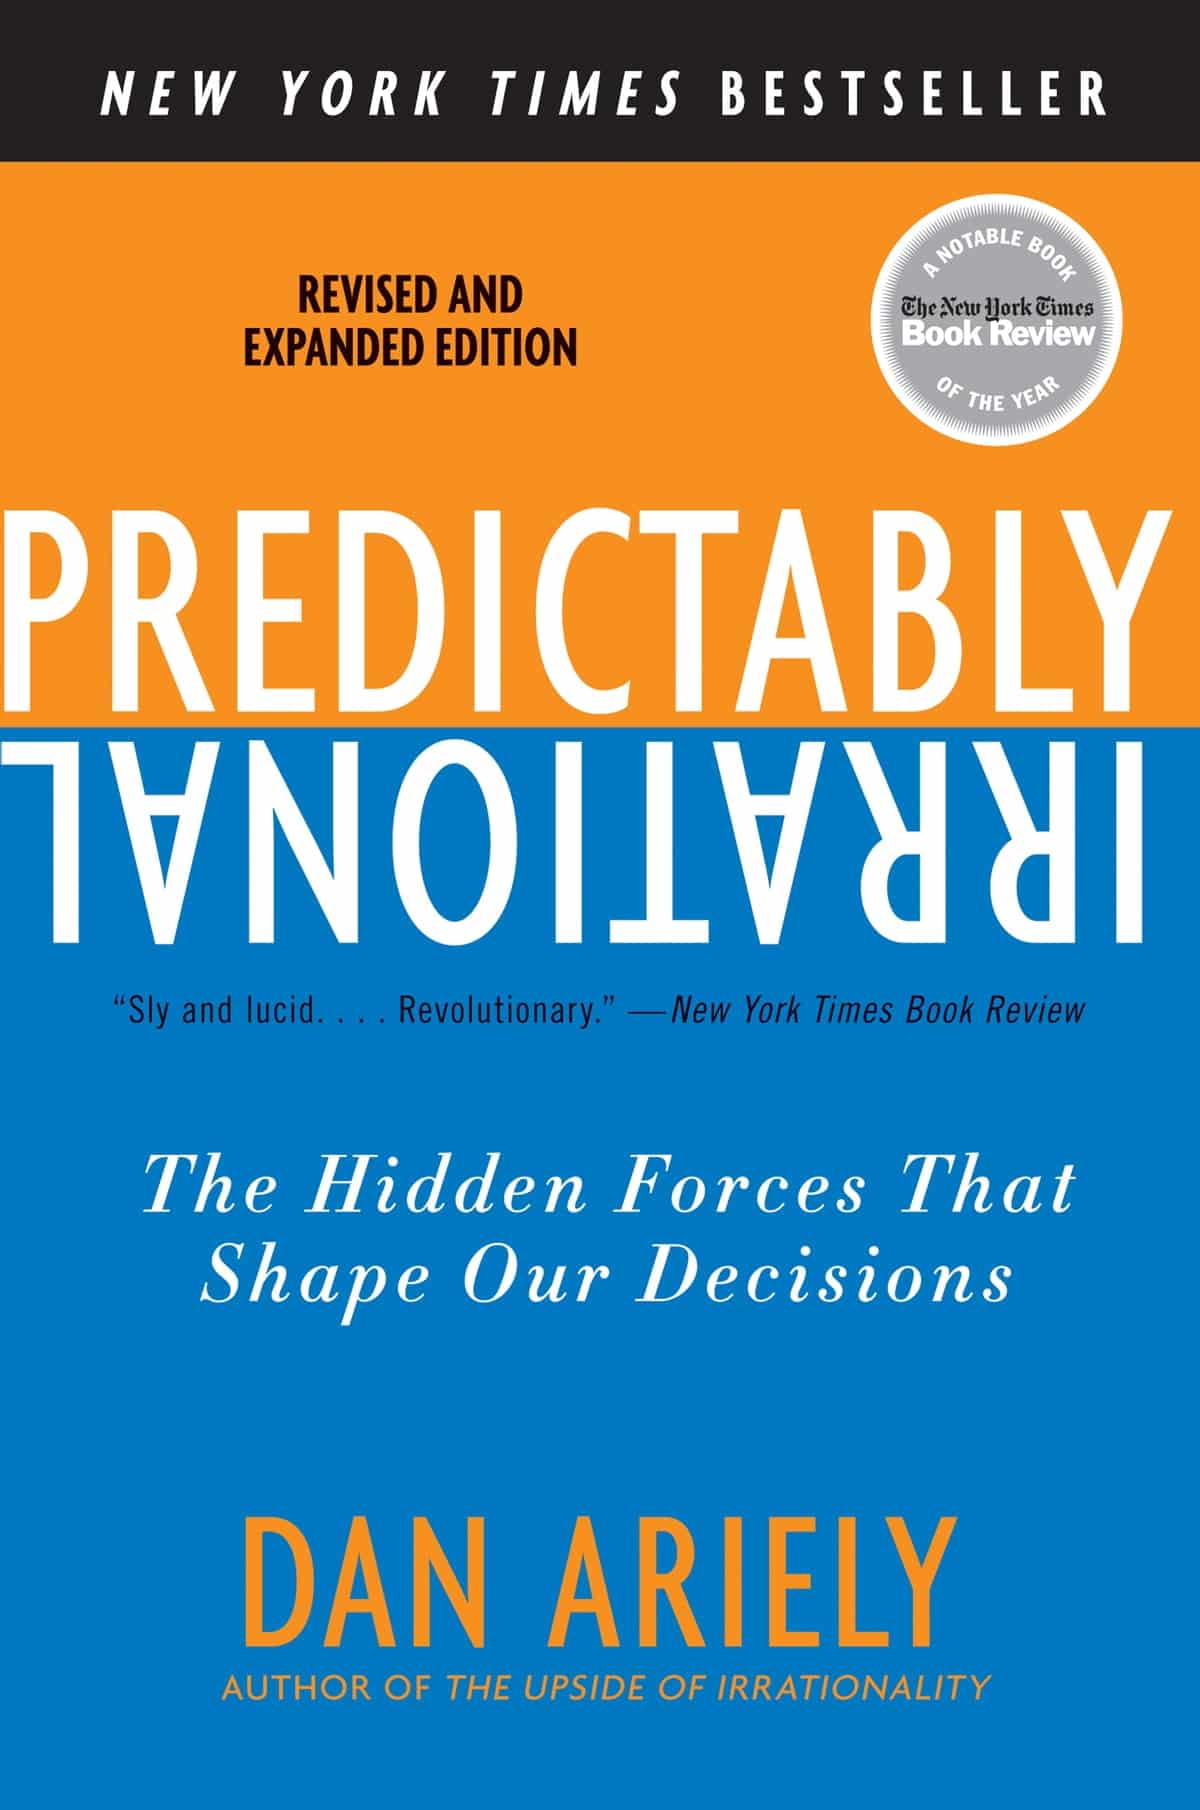 ‘Predictably Irrational’ by Dan Ariely